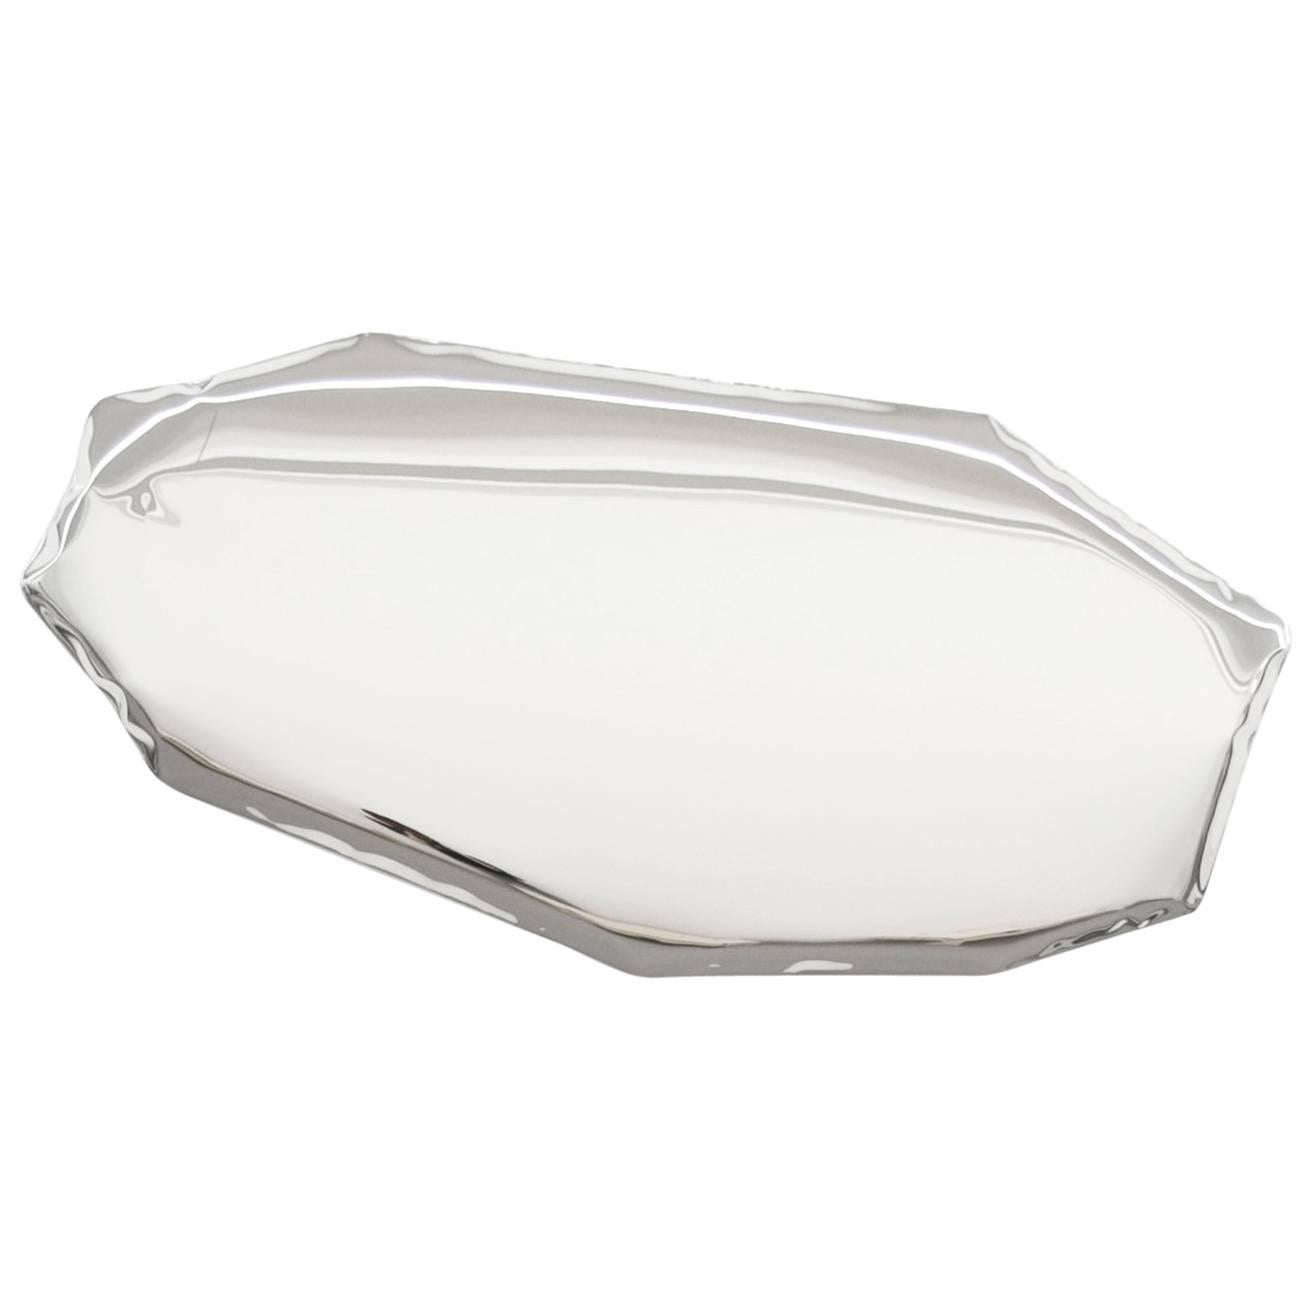 Mirror 'Tafla C4' in Polished Stainless Steel by Zieta For Sale 4